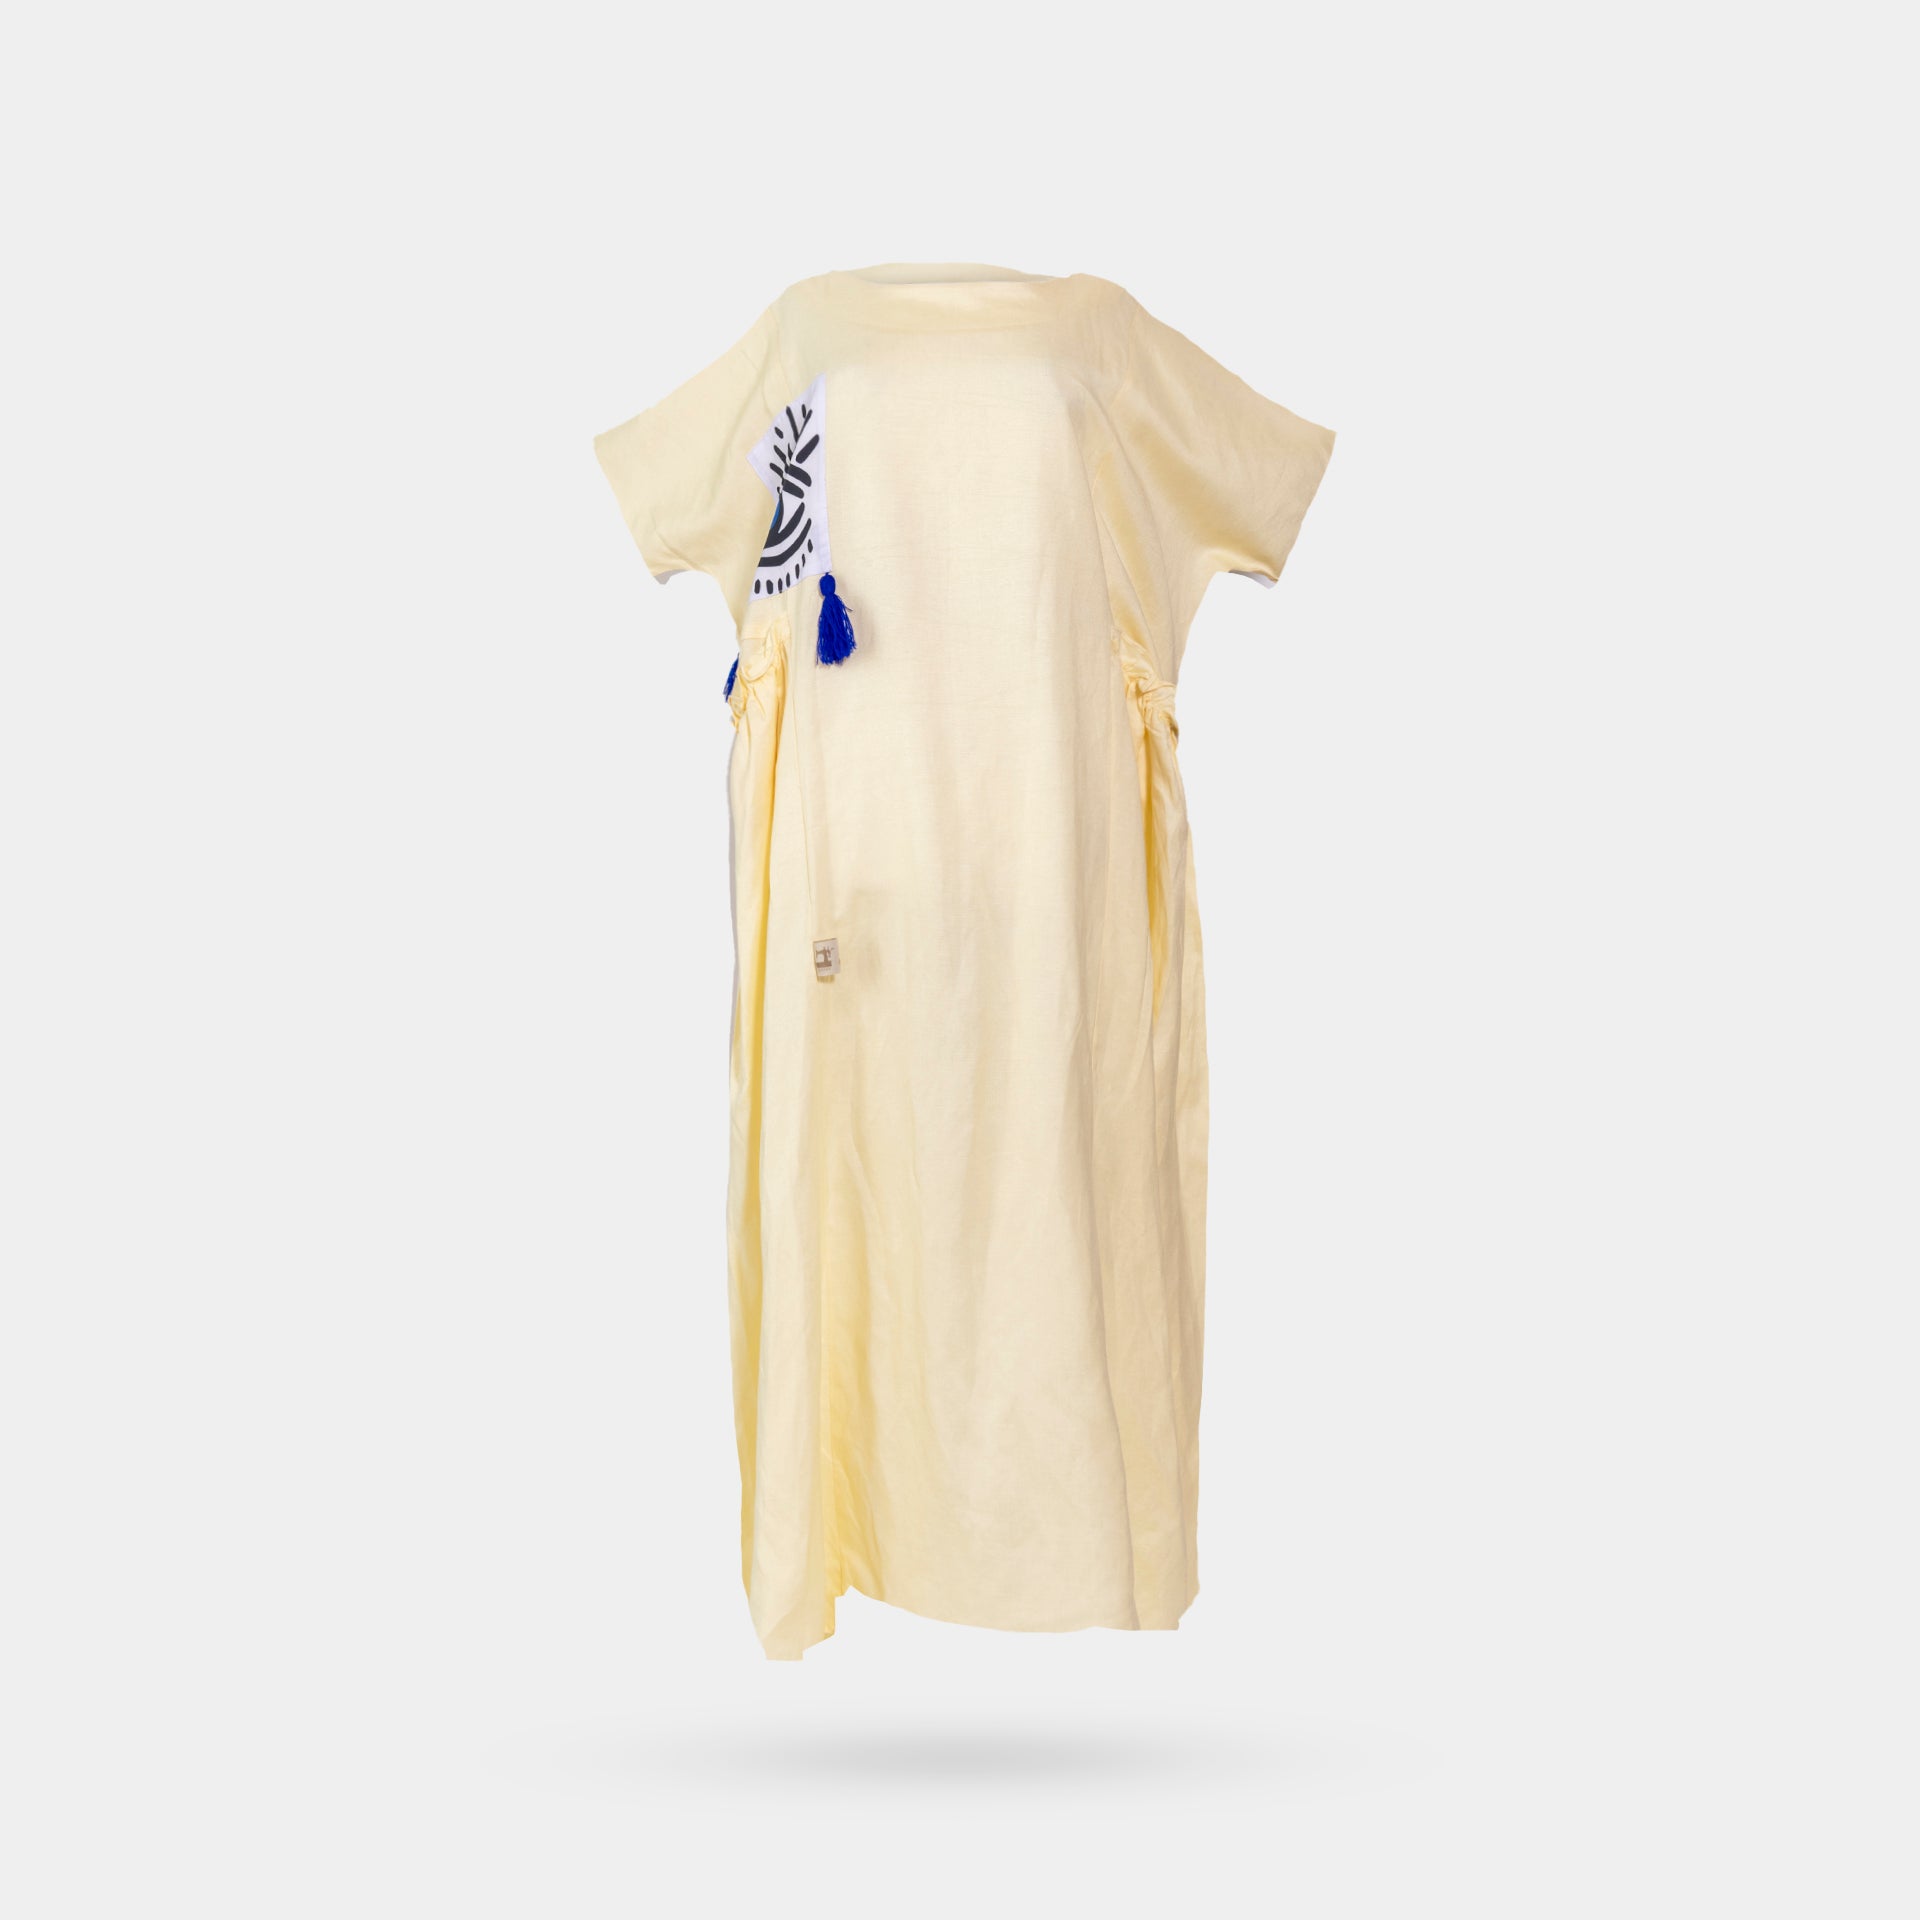 Beige Linen Dress with Short Sleeves with an Eye Logo on the front From Darzah